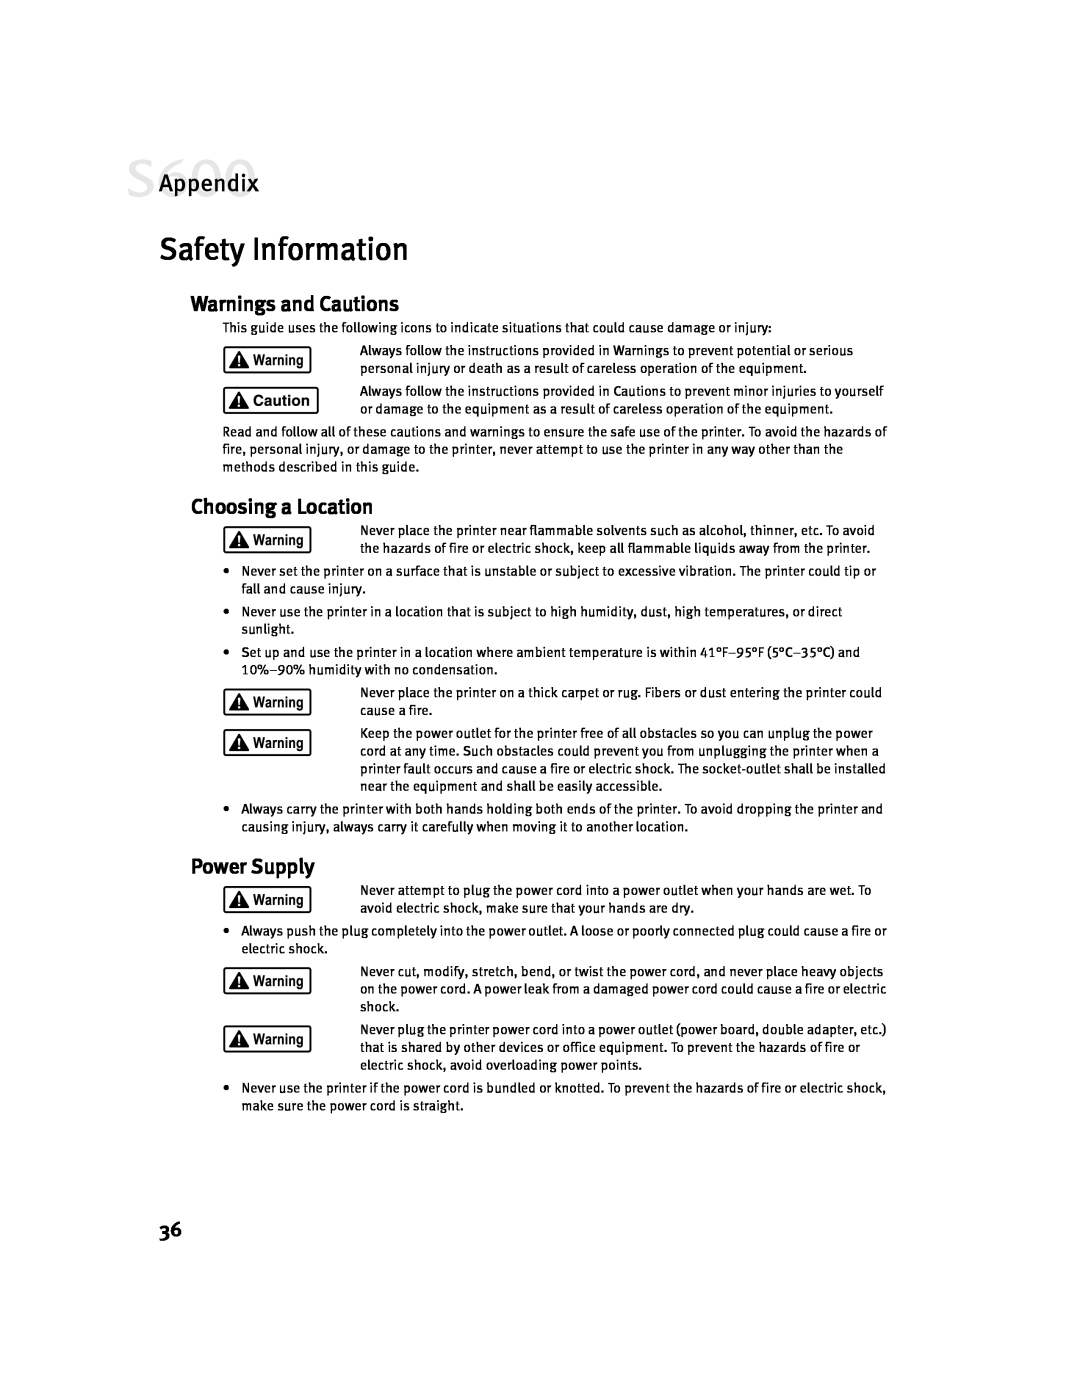 Canon S600 quick start Safety Information, Warnings and Cautions, Choosing a Location, Power Supply, Appendix 